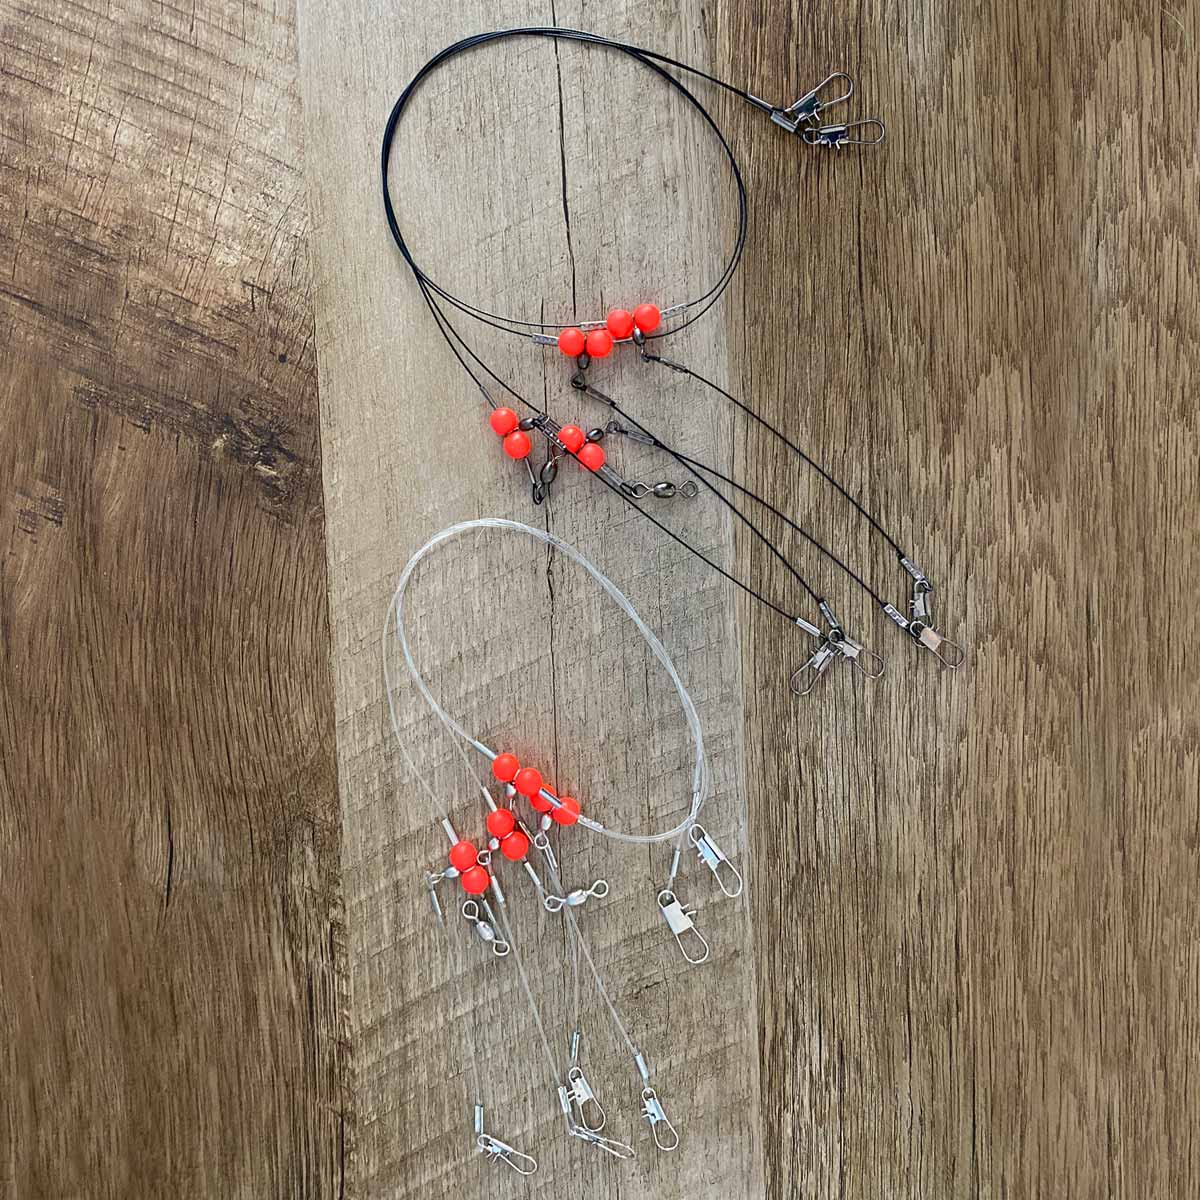 Double Drop Rig, Mono or Wire - Wire